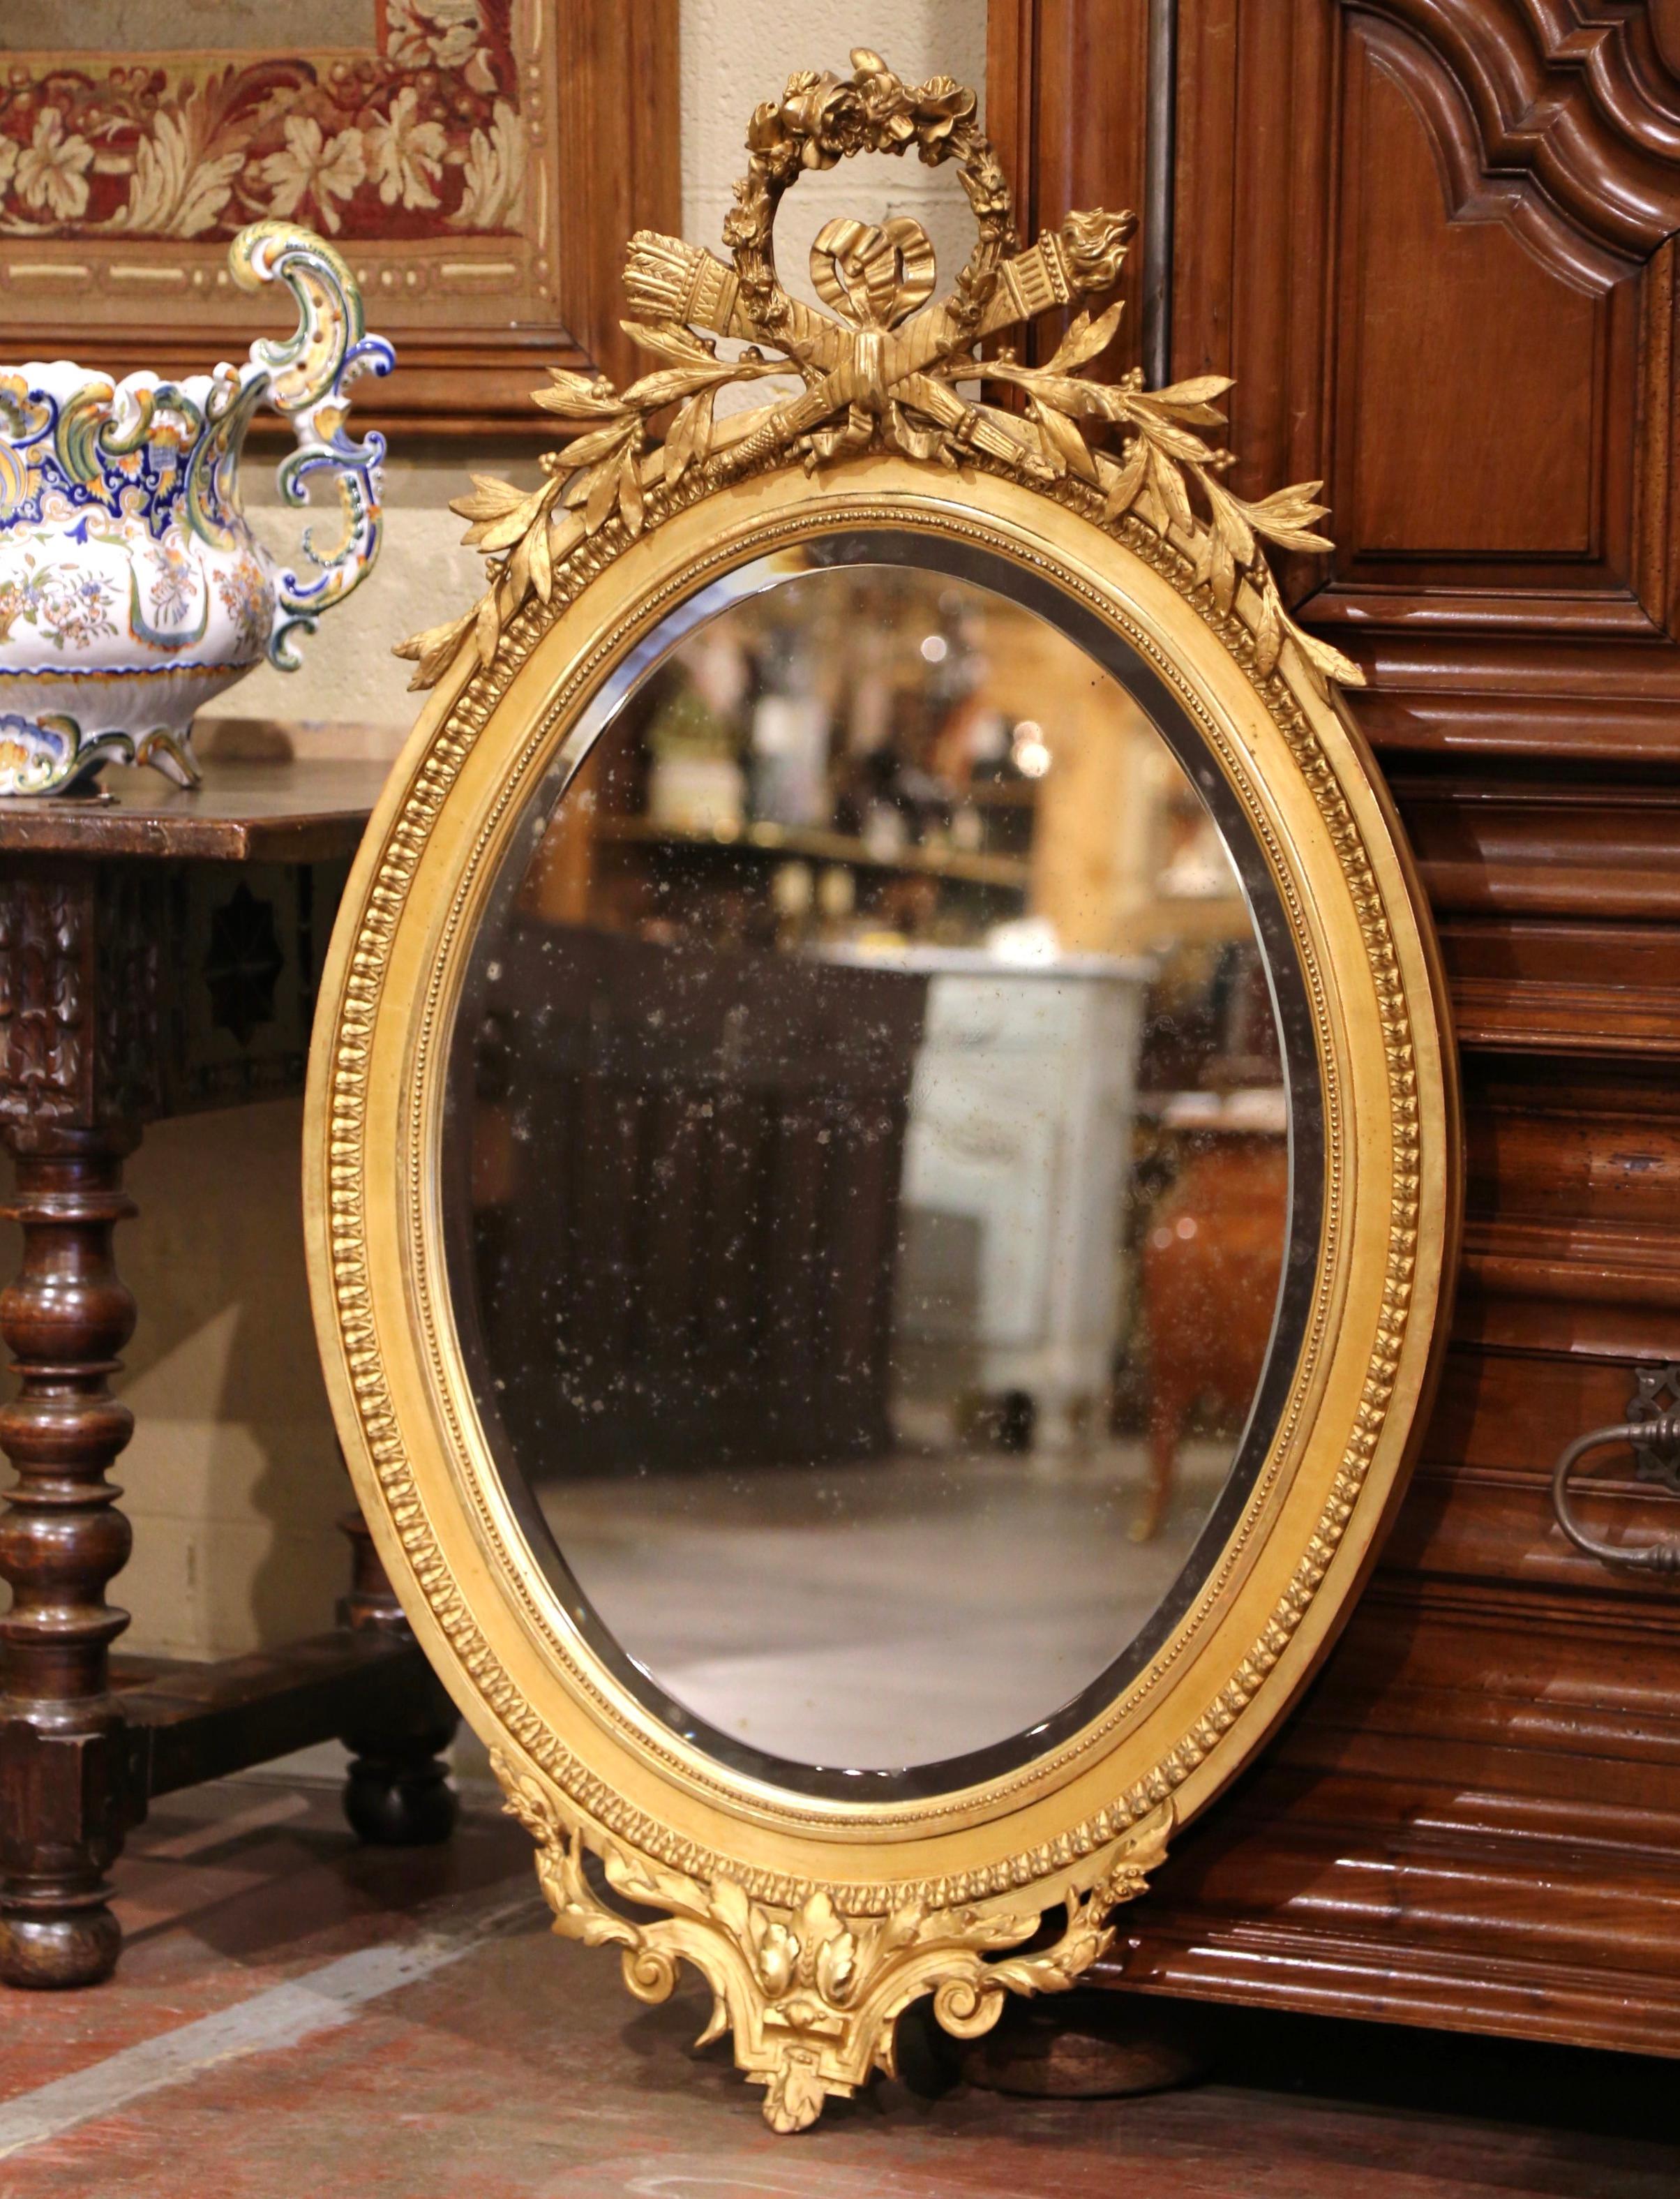 Decorate a powder room or entryway with this elegant antique gilt wall mirror. Crafted in France, circa 1870, the beaded oval frame is decorated with a large cartouche at the pediment with floral motifs, torch decor and laurel leaf over the